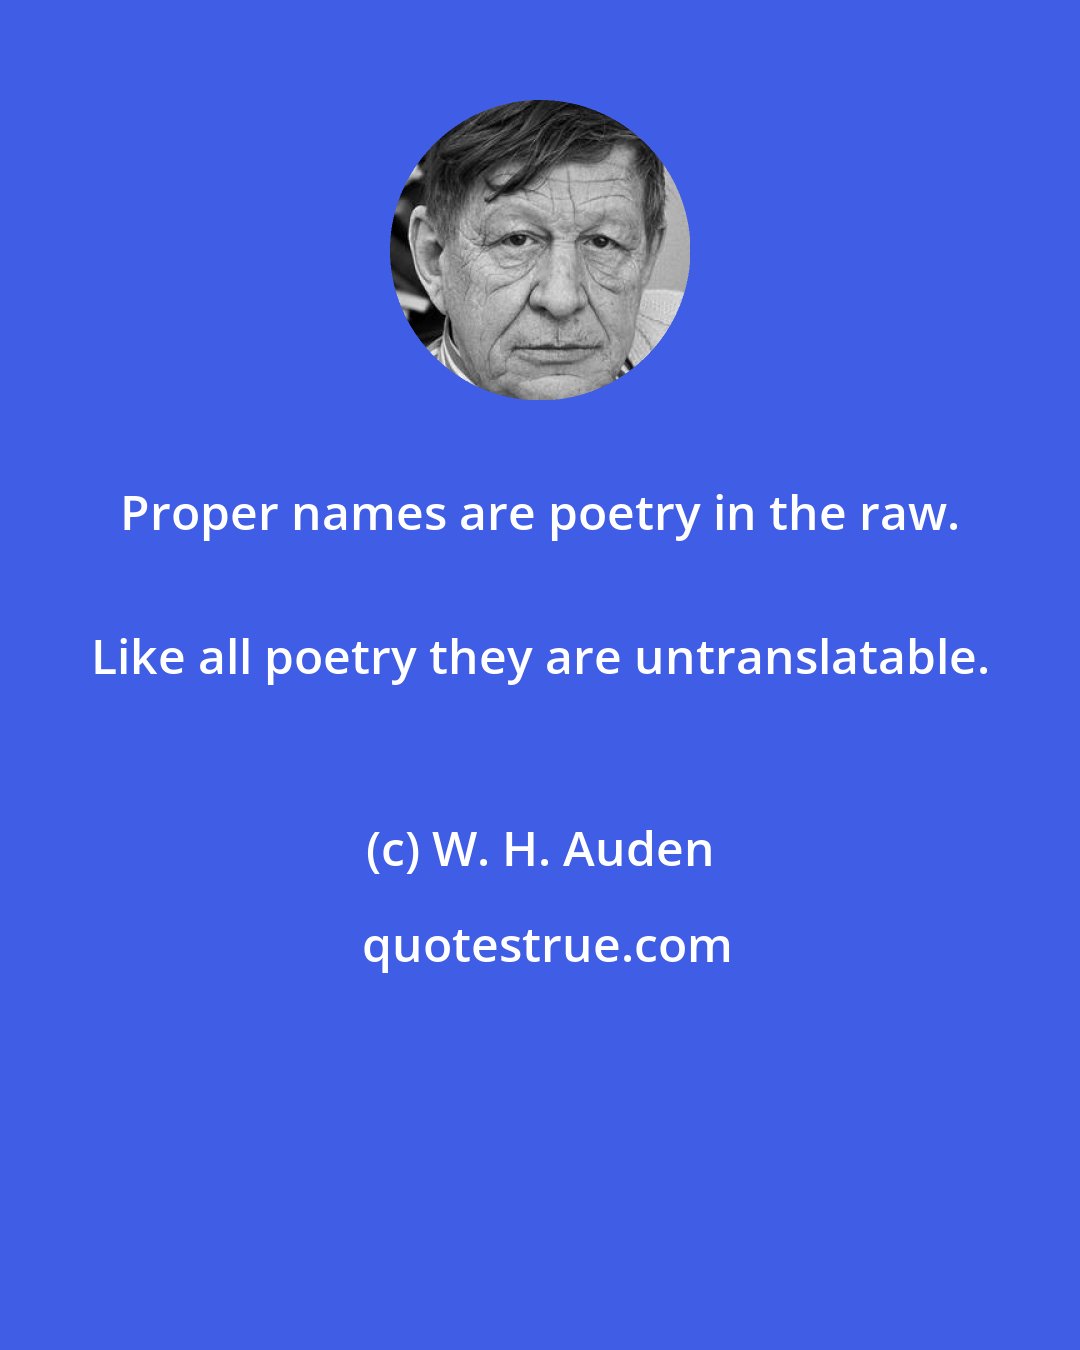 W. H. Auden: Proper names are poetry in the raw. 
 Like all poetry they are untranslatable.